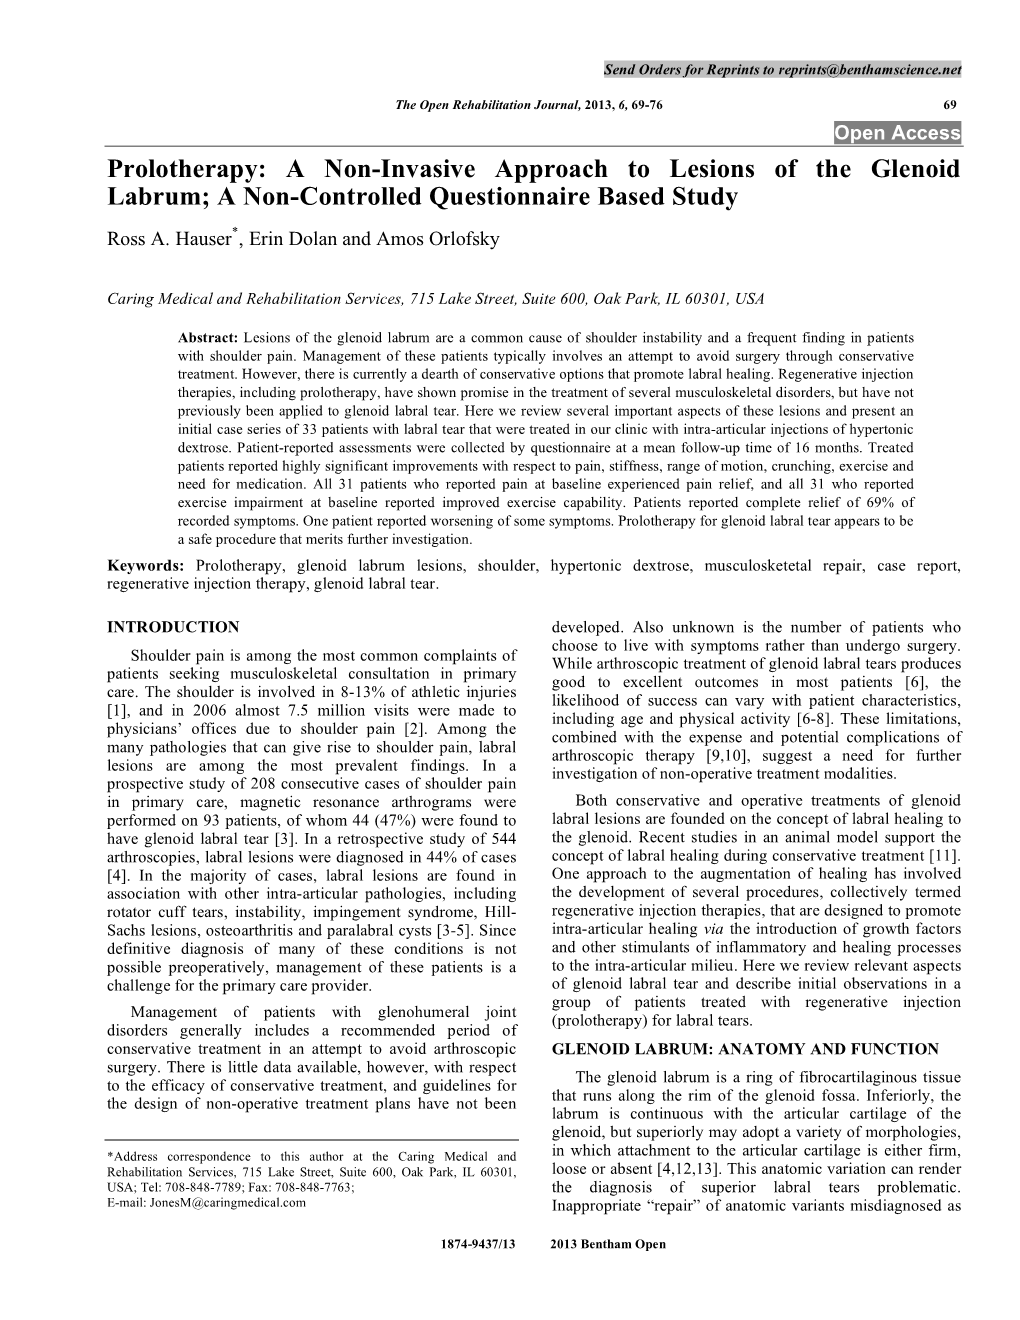 Prolotherapy: a Non-Invasive Approach to Lesions of the Glenoid Labrum; a Non-Controlled Questionnaire Based Study Ross A